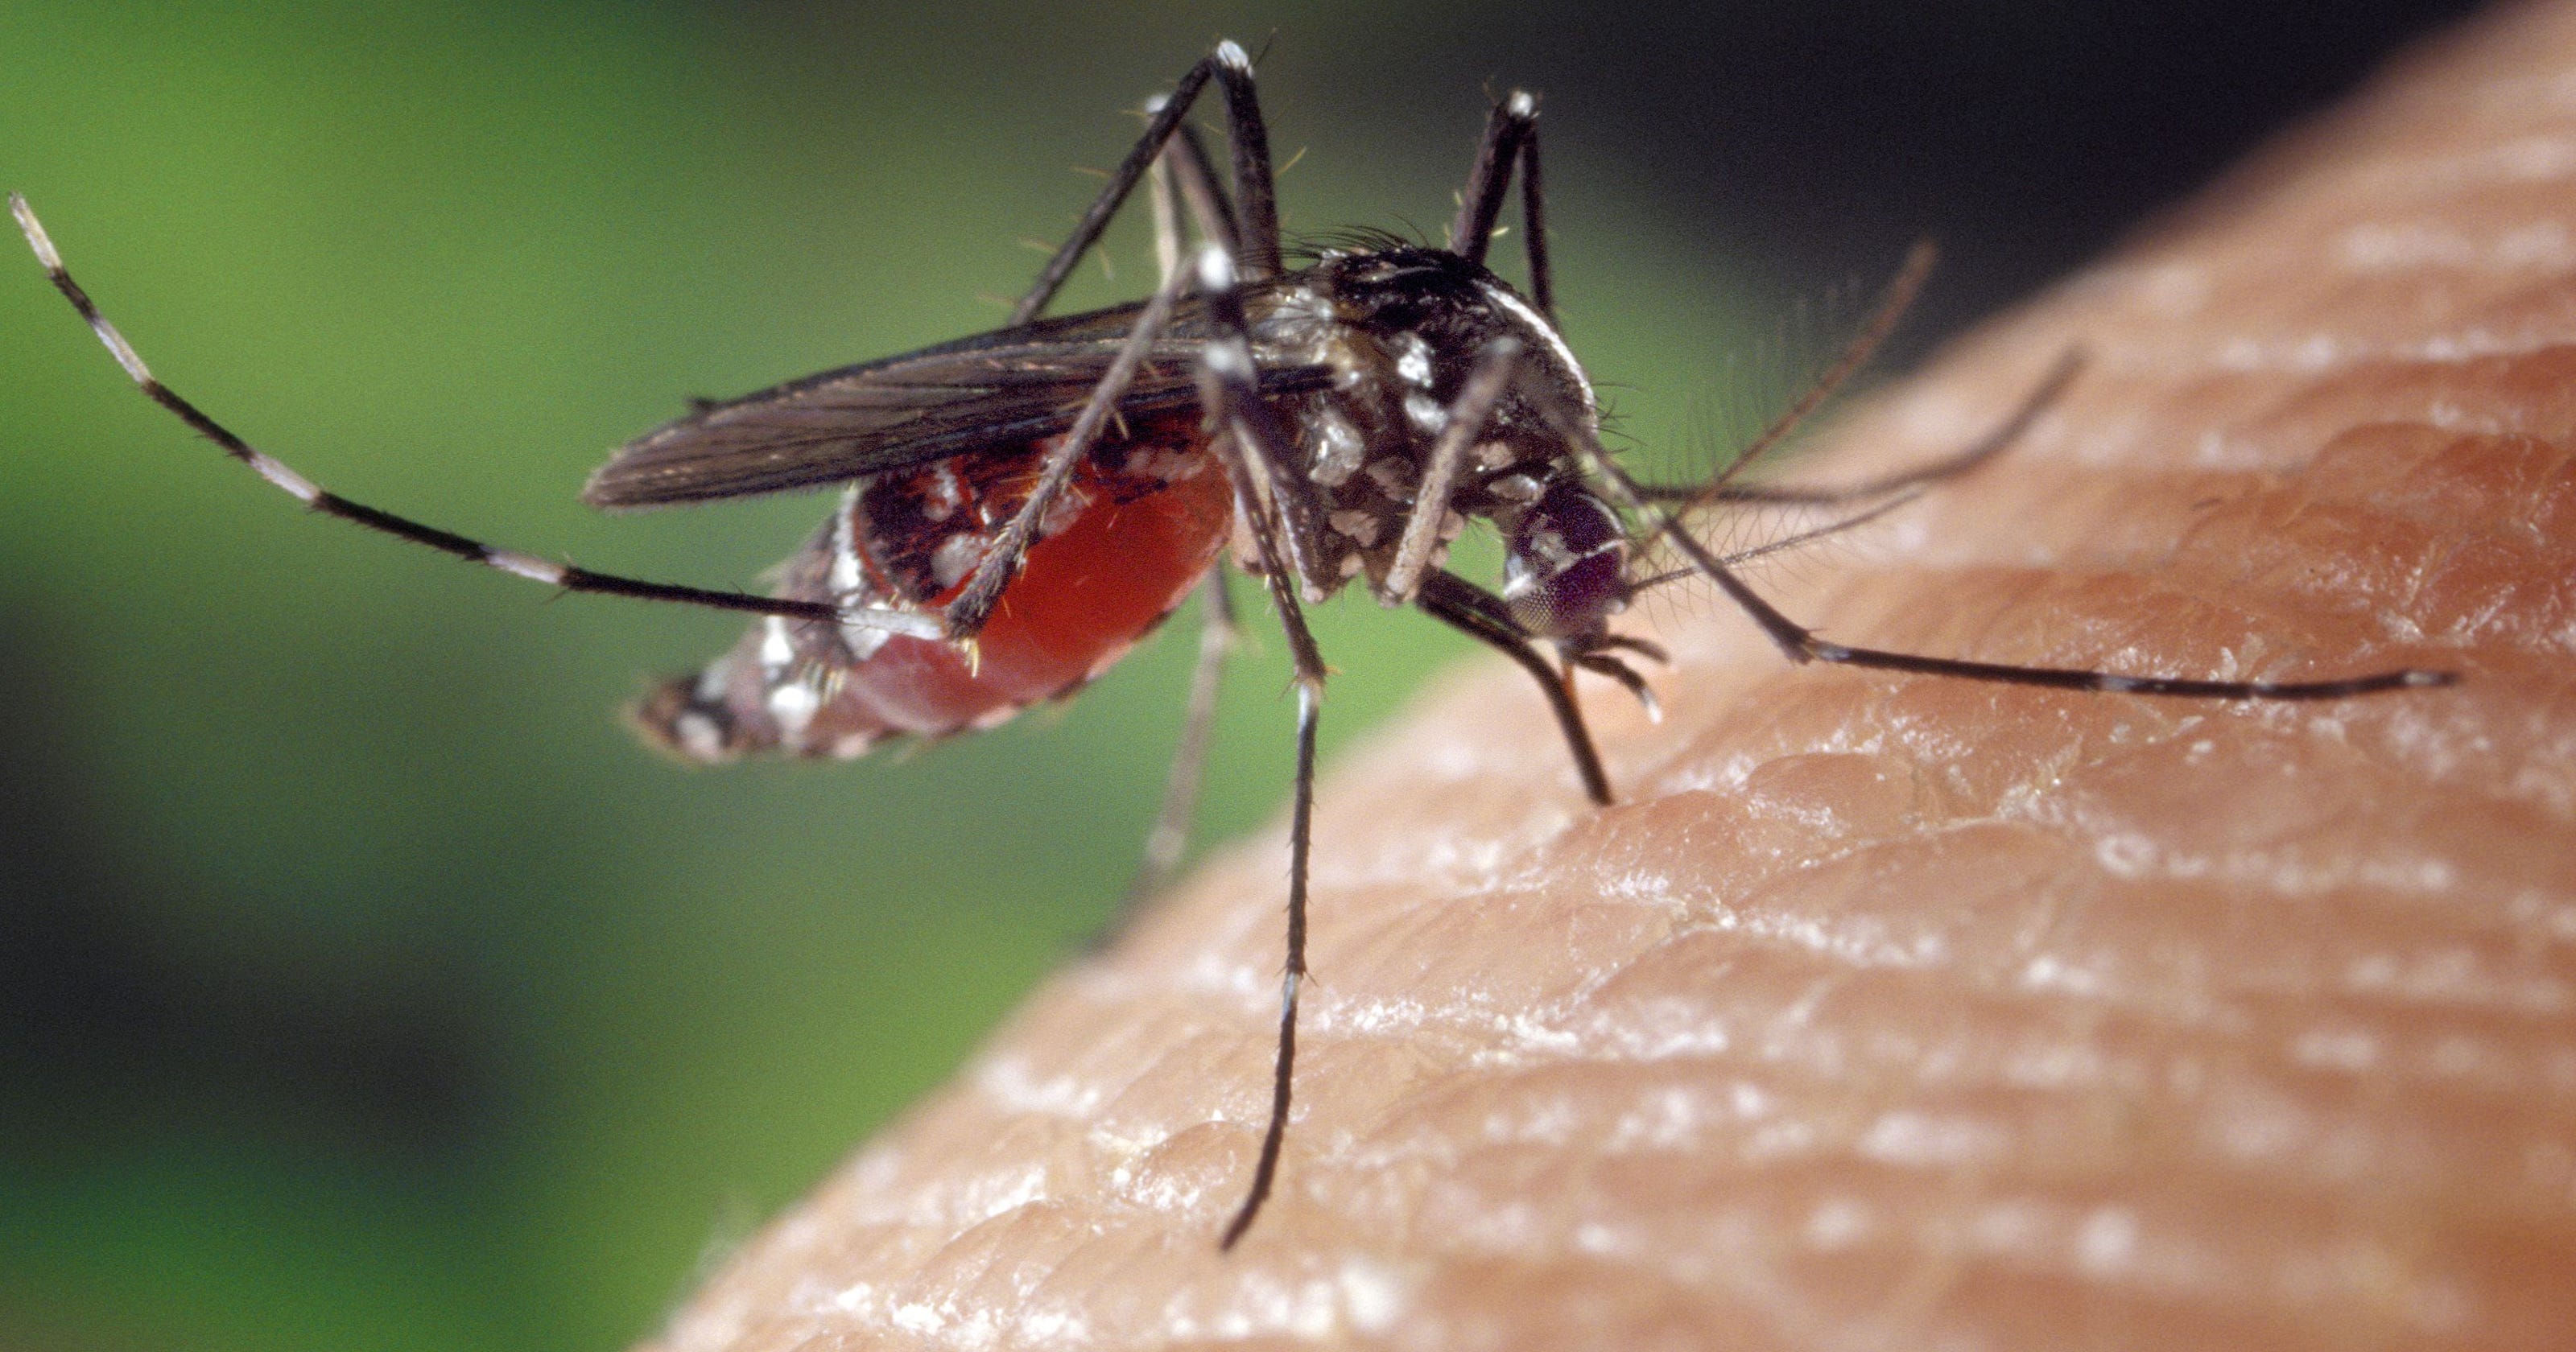 81 cases of mosquito virus now tallied in Florida